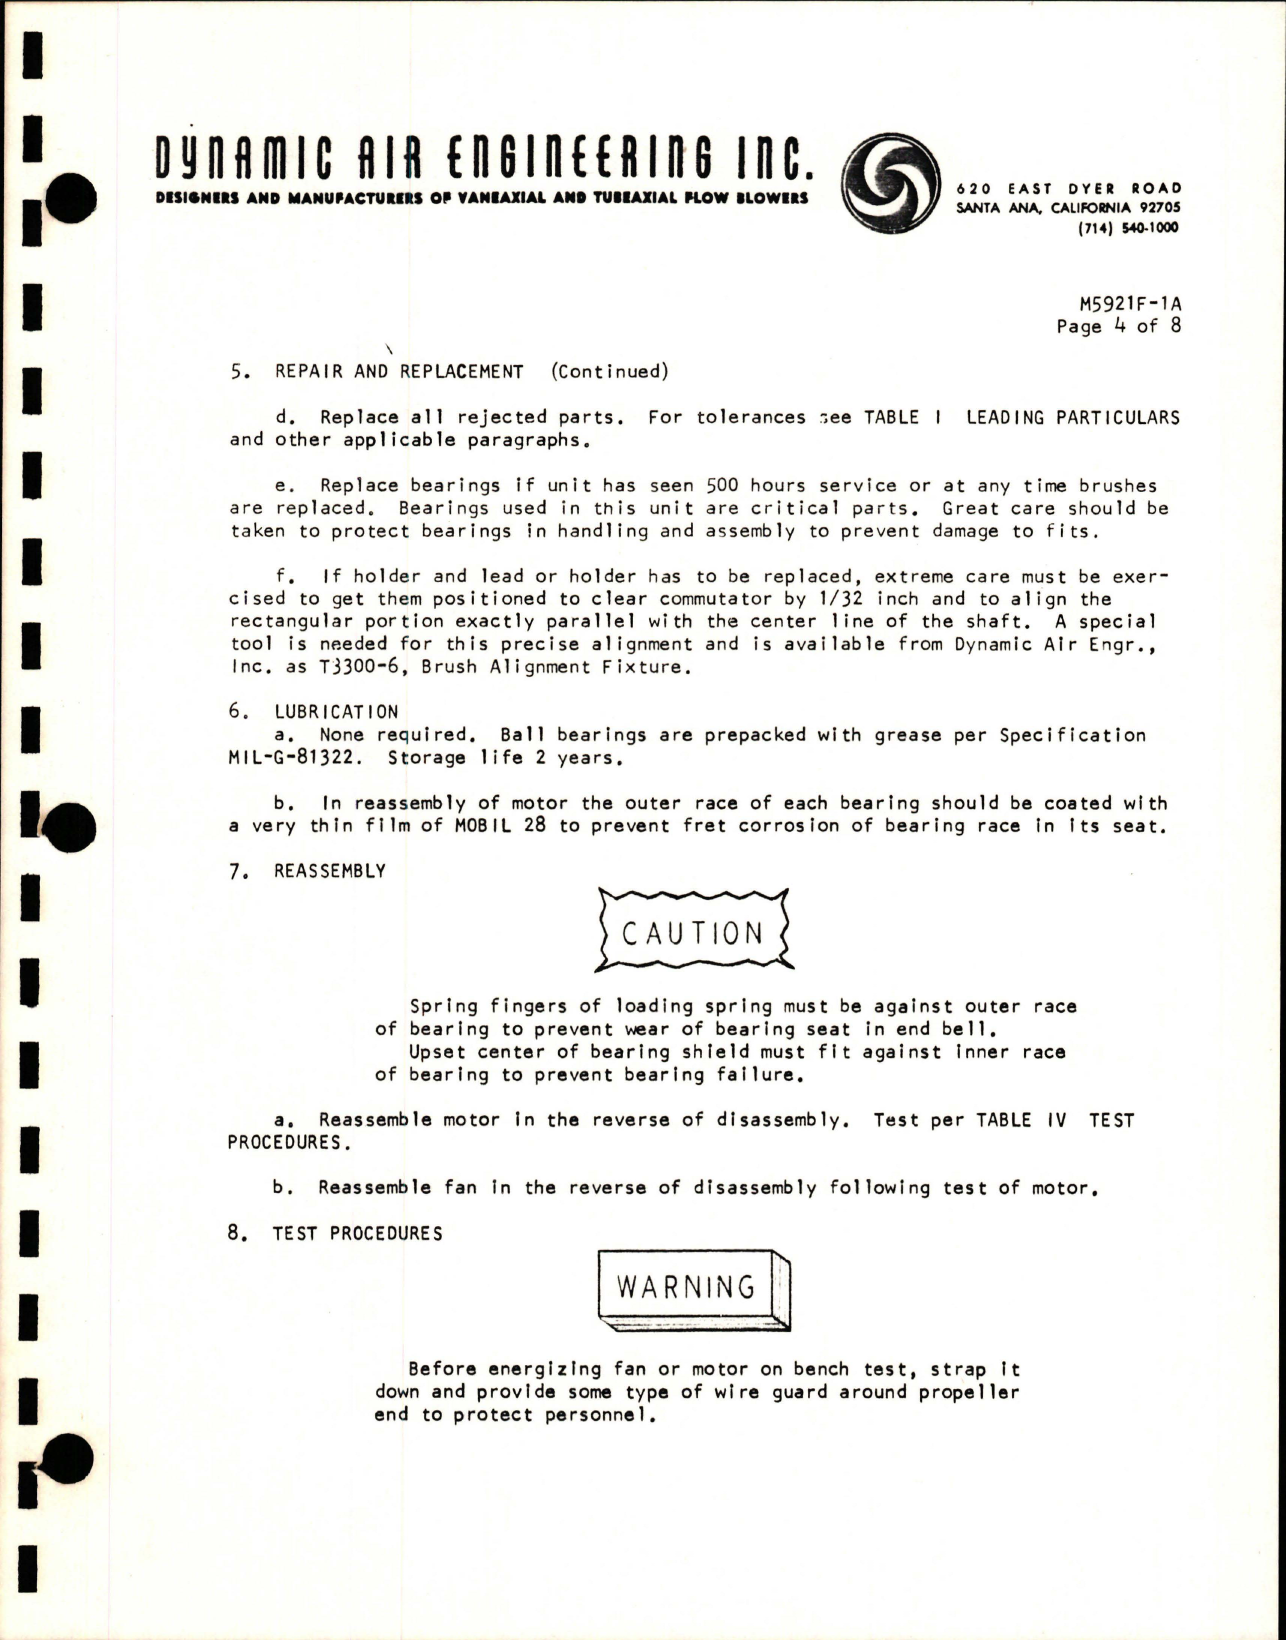 Sample page 5 from AirCorps Library document: Overhaul Instructions for Vaneaxial Fan w Motor M3424G - Part M5921F-1A 